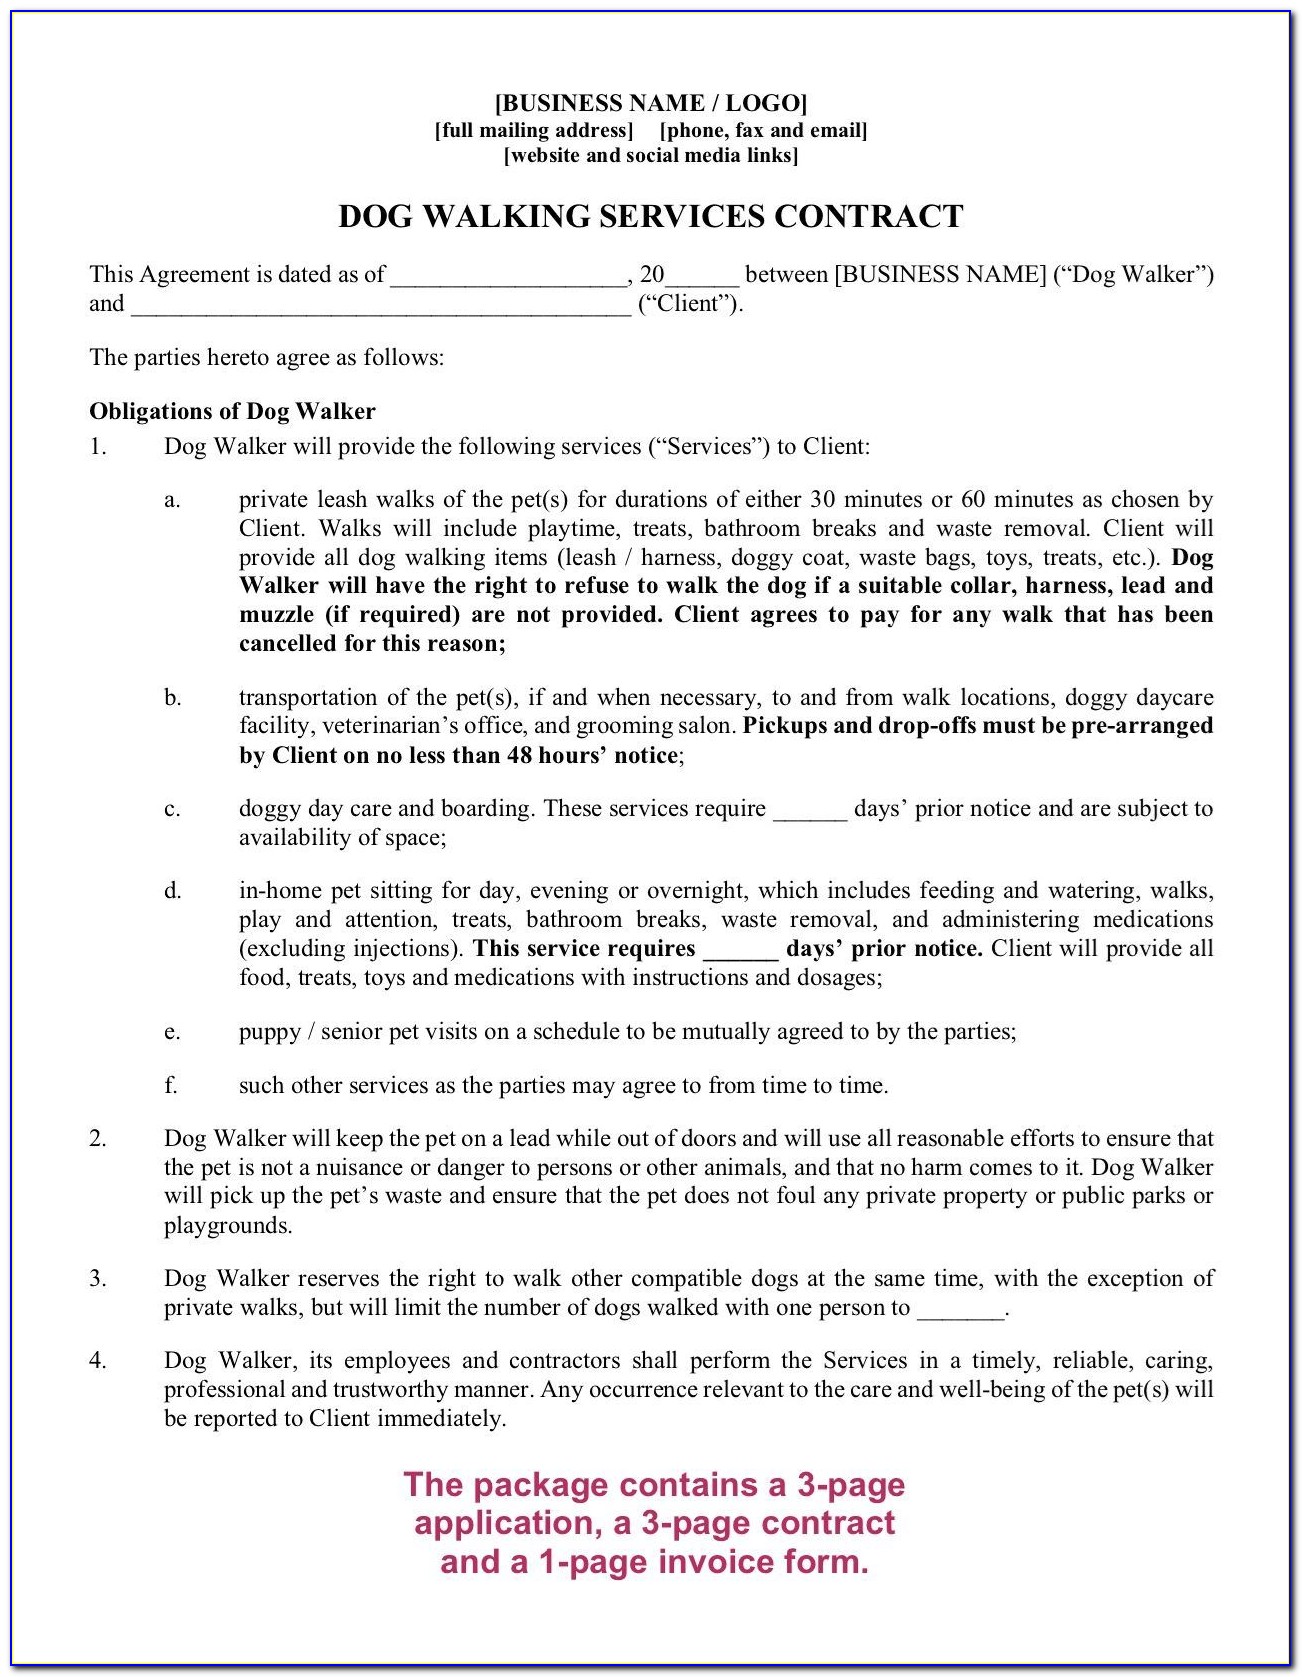 Dog Walking Contracts Samples Uk